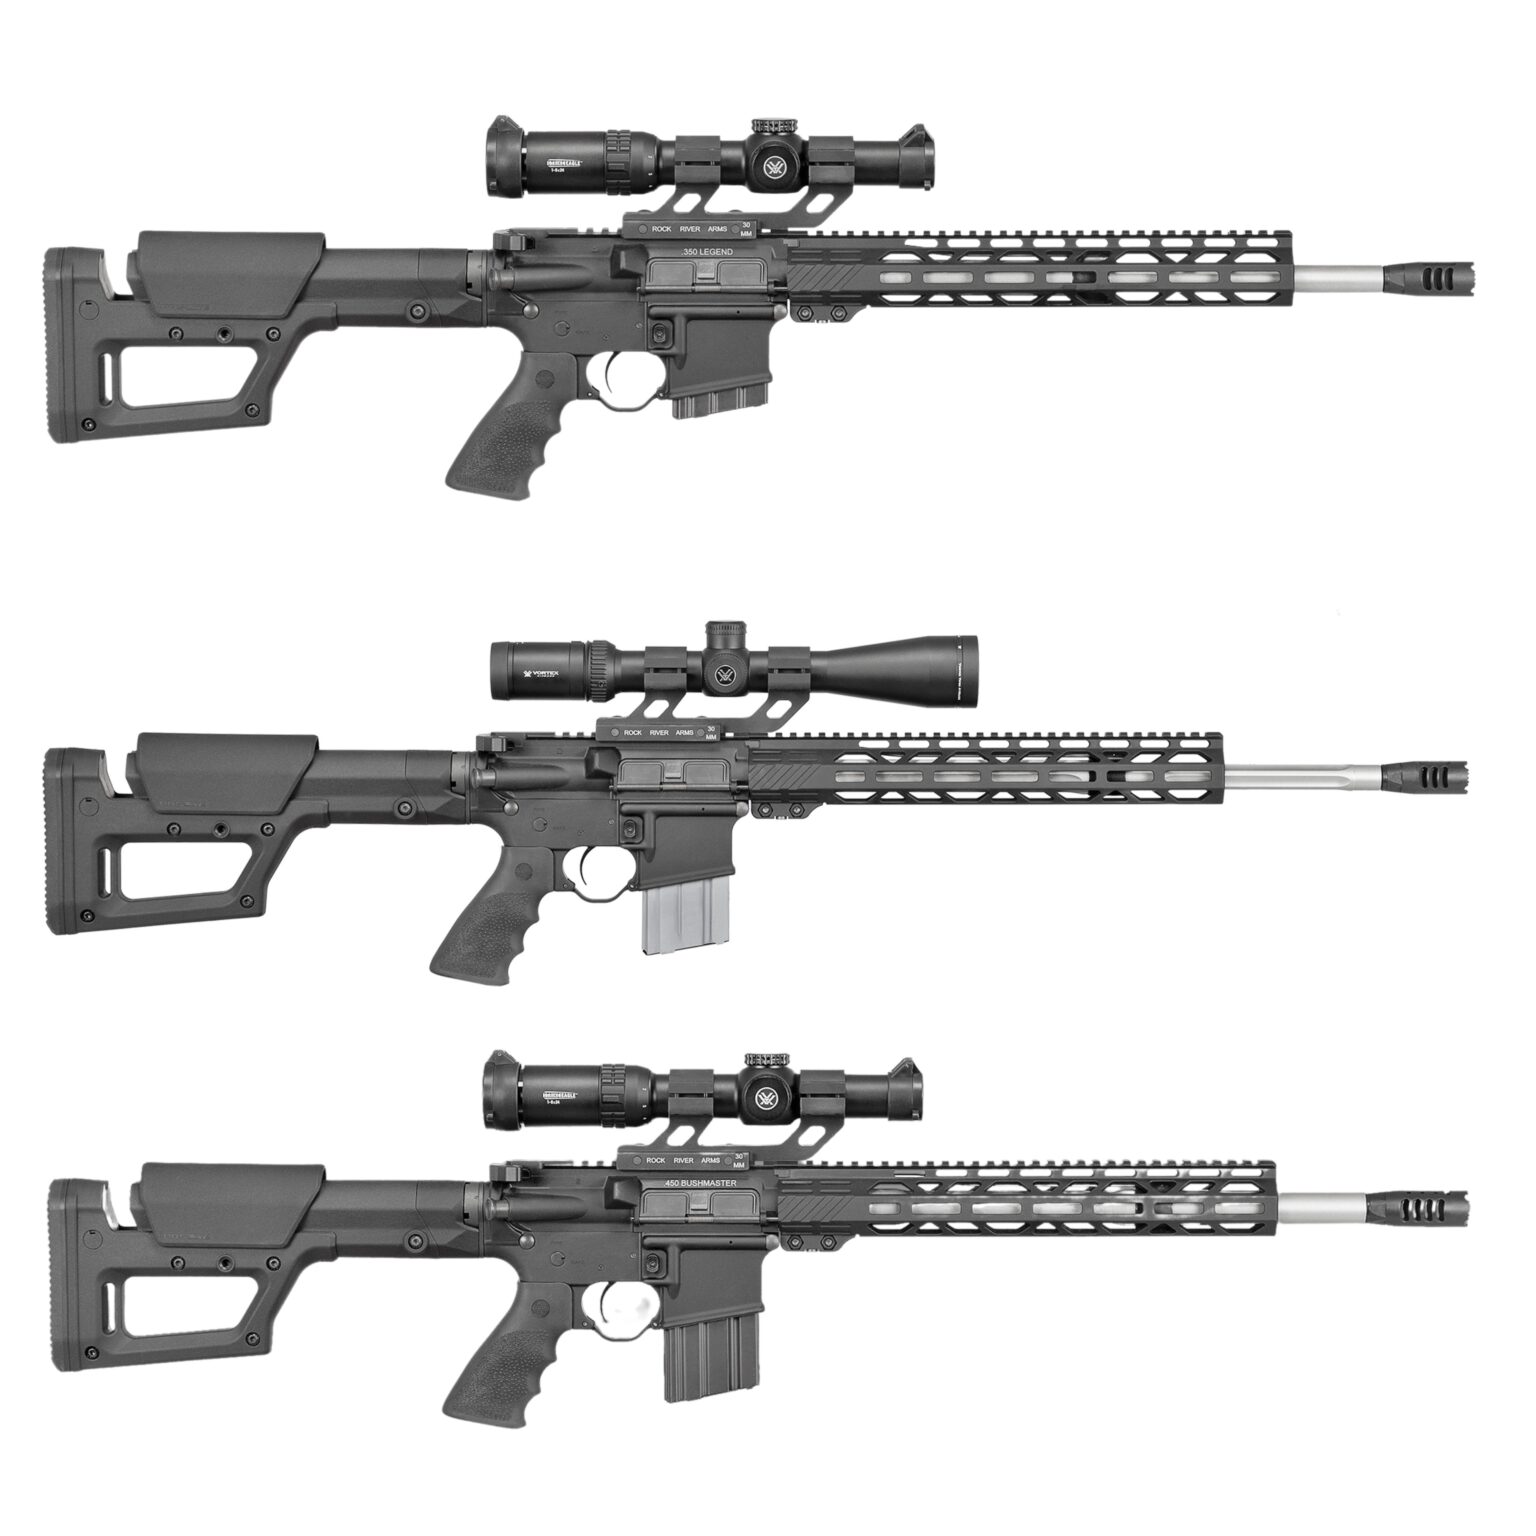 Rock River Arms Introduces the Ascendant Series AR Rifles TheGunMag